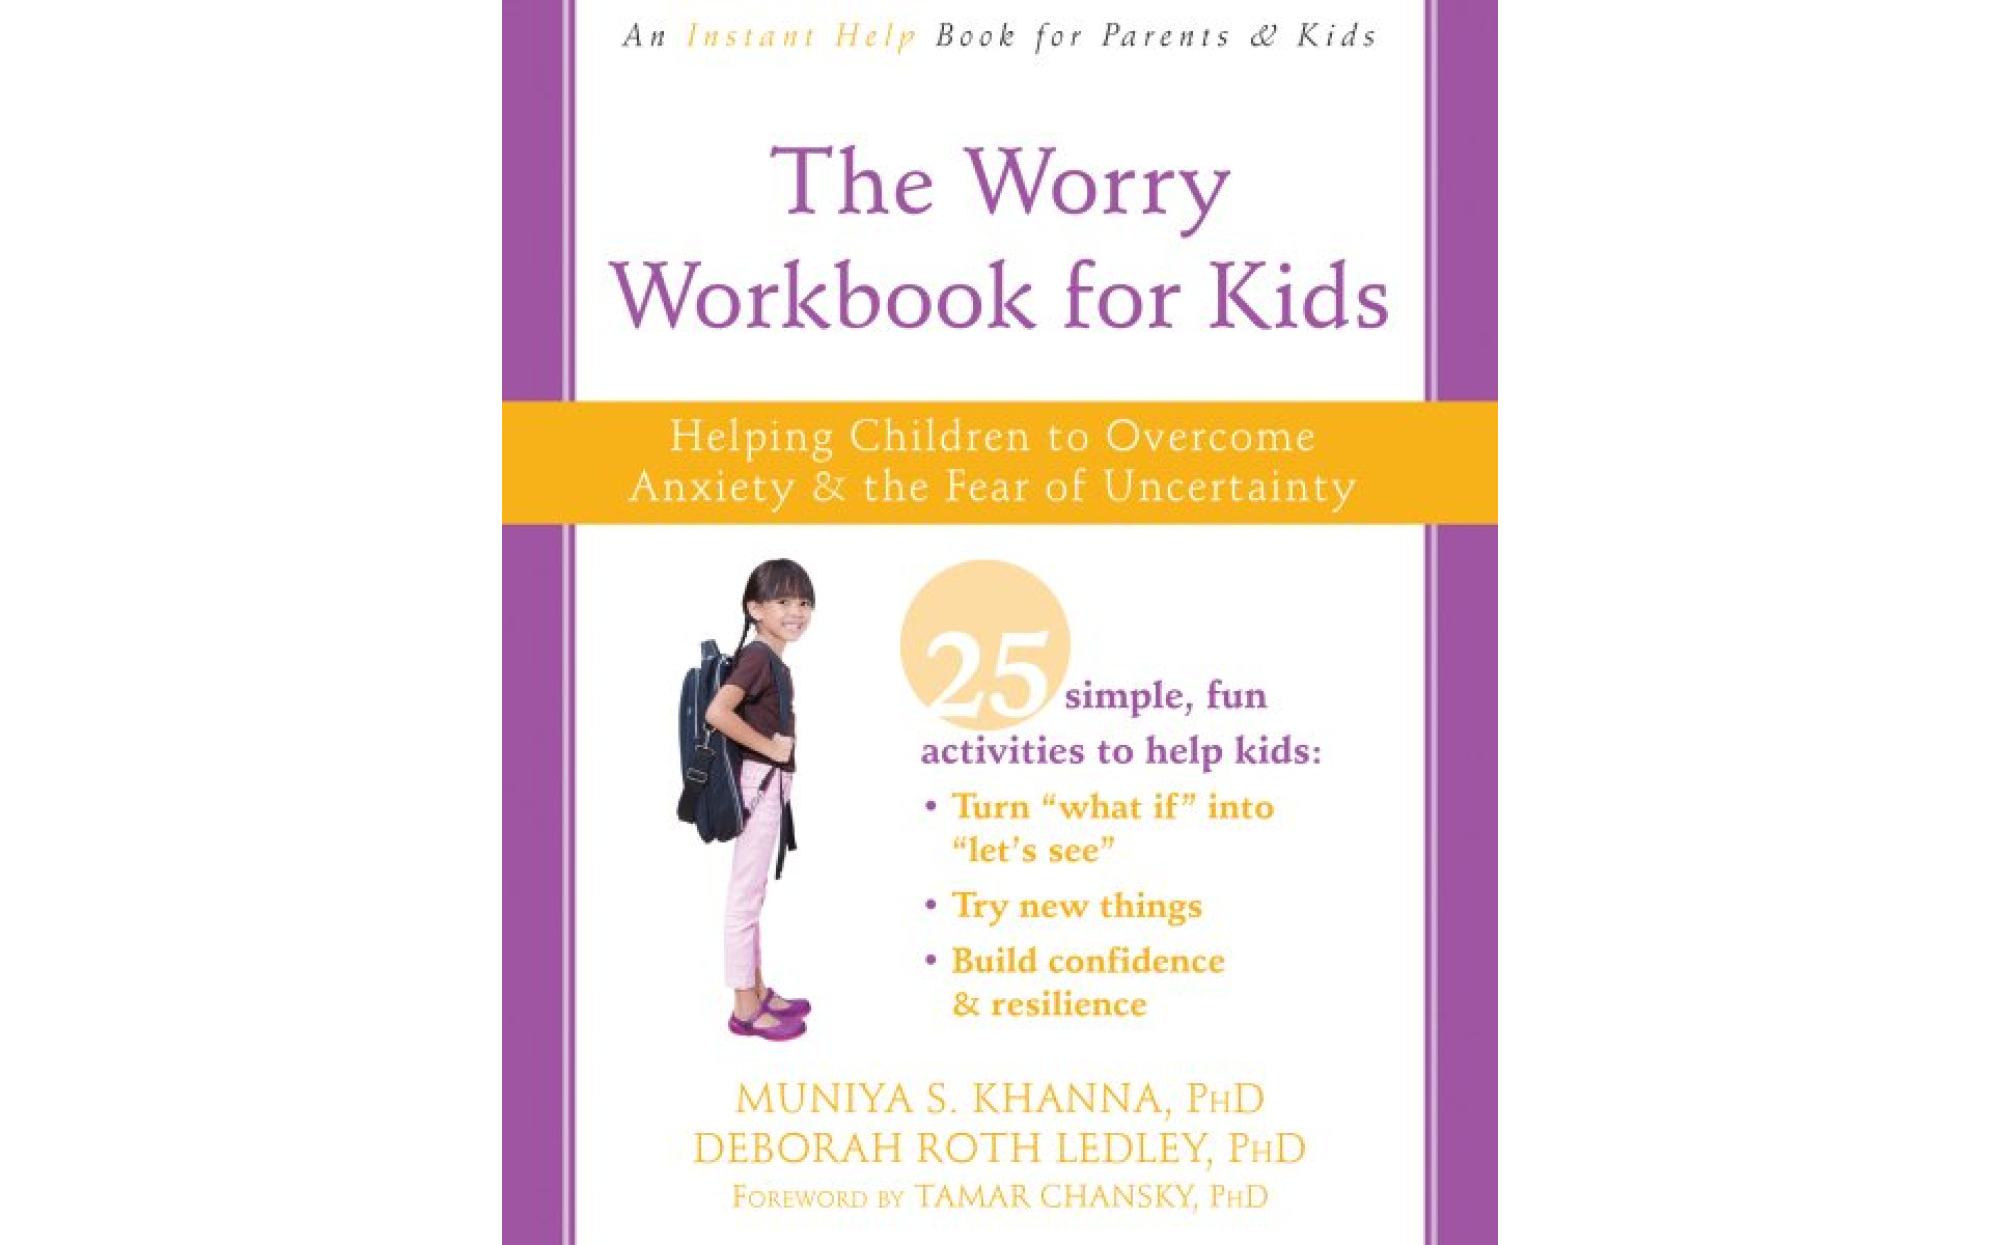 Children　Kids:　Helping　Anxiety　–　to　The　and　Uncertainty　the　Books　Fear　of　Worry　for　Workbook　Overcome